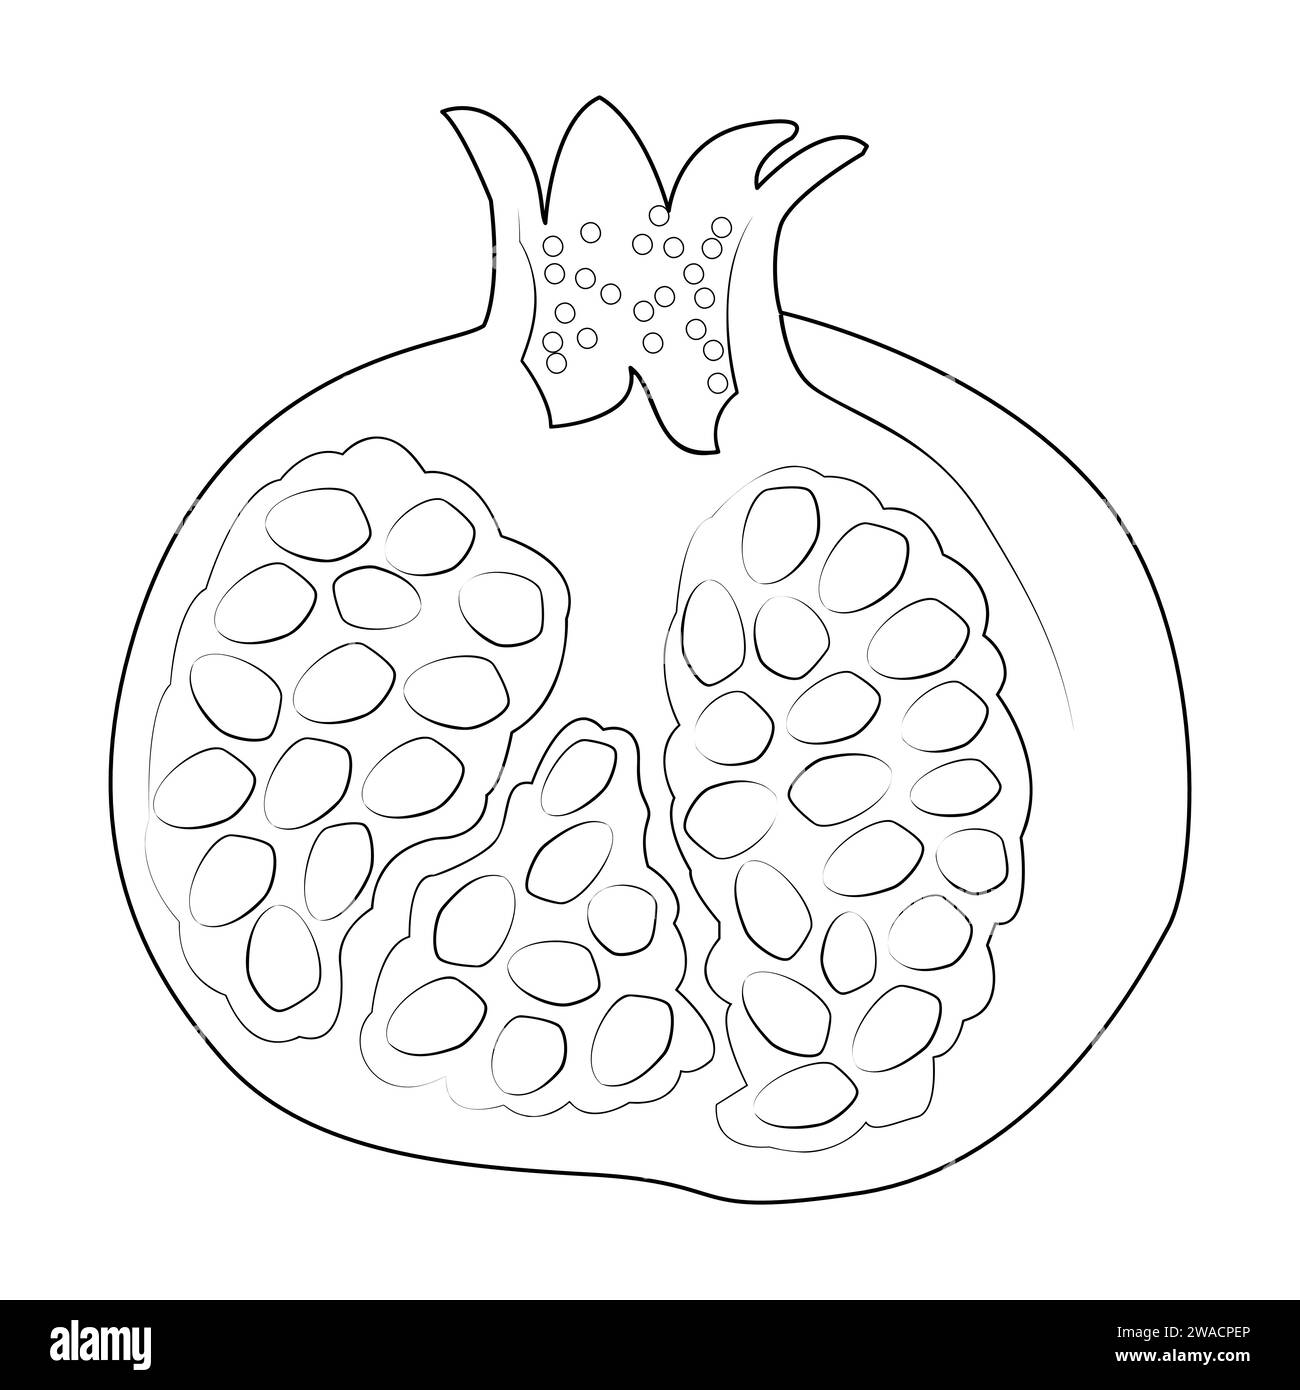 Pomegranate Illustration. Coloring page. Line Art. Stock Vector